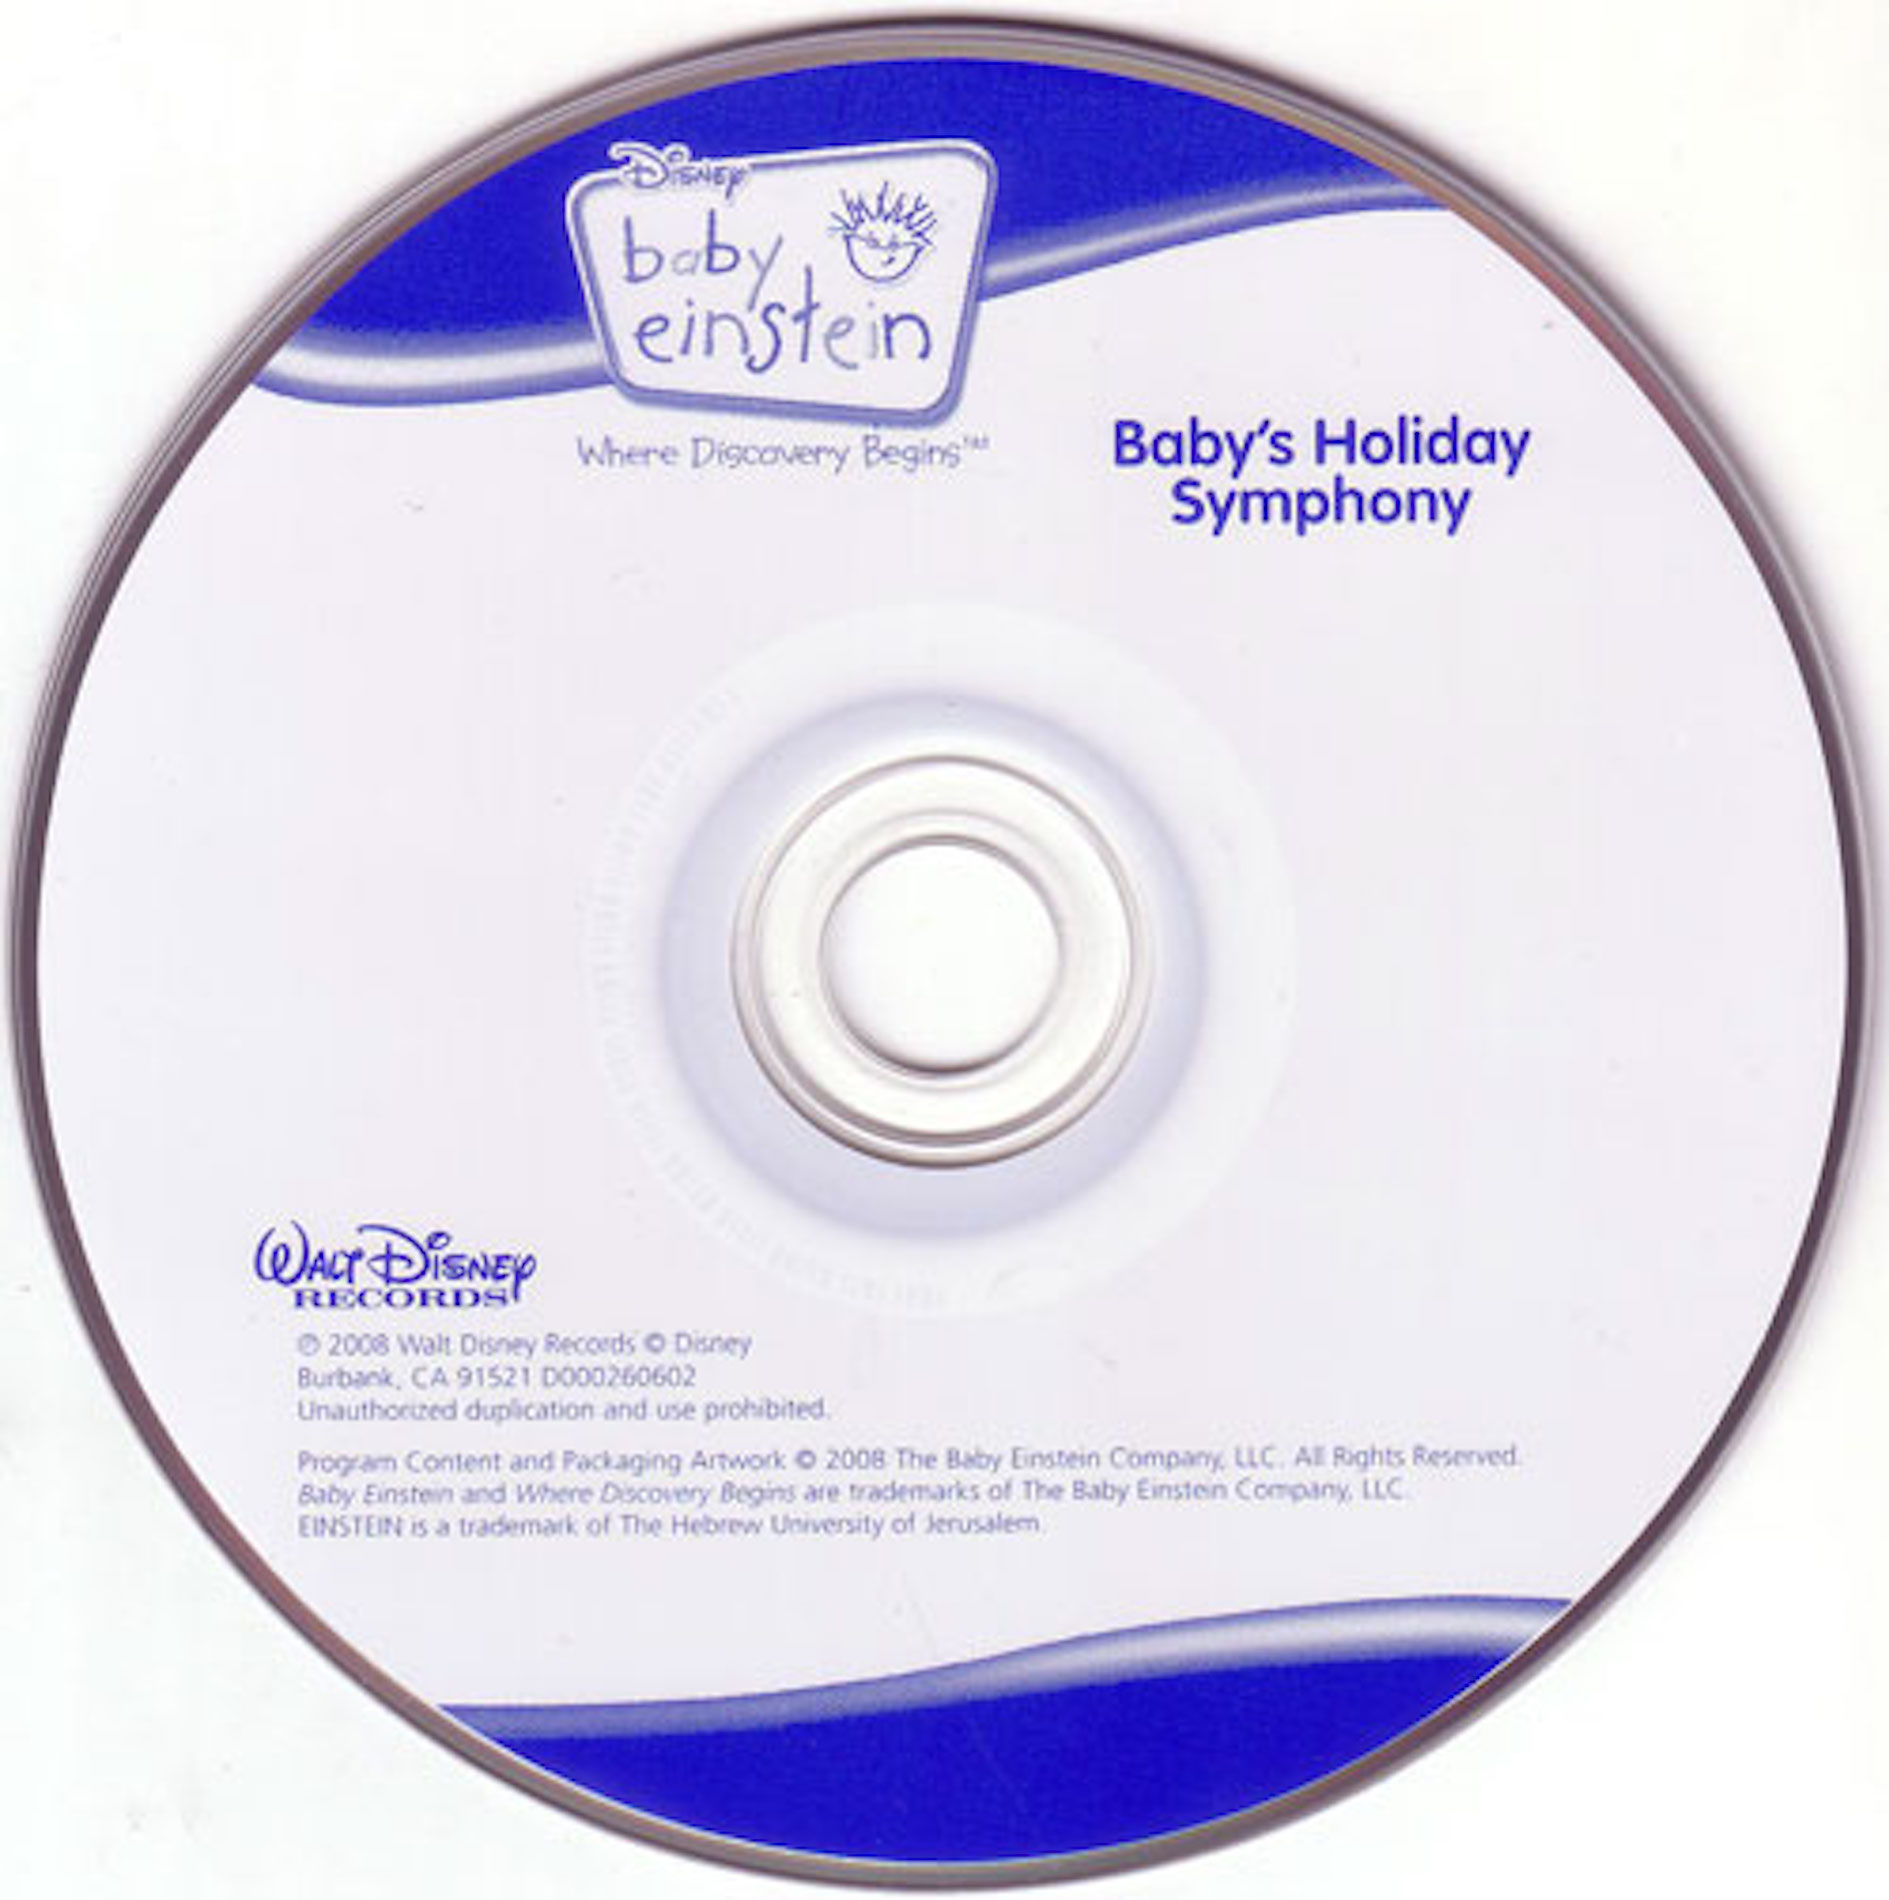 Covers Box Sk Disney Baby Einstein Baby S Holiday Symphony 08 High Quality Dvd Blueray Movie